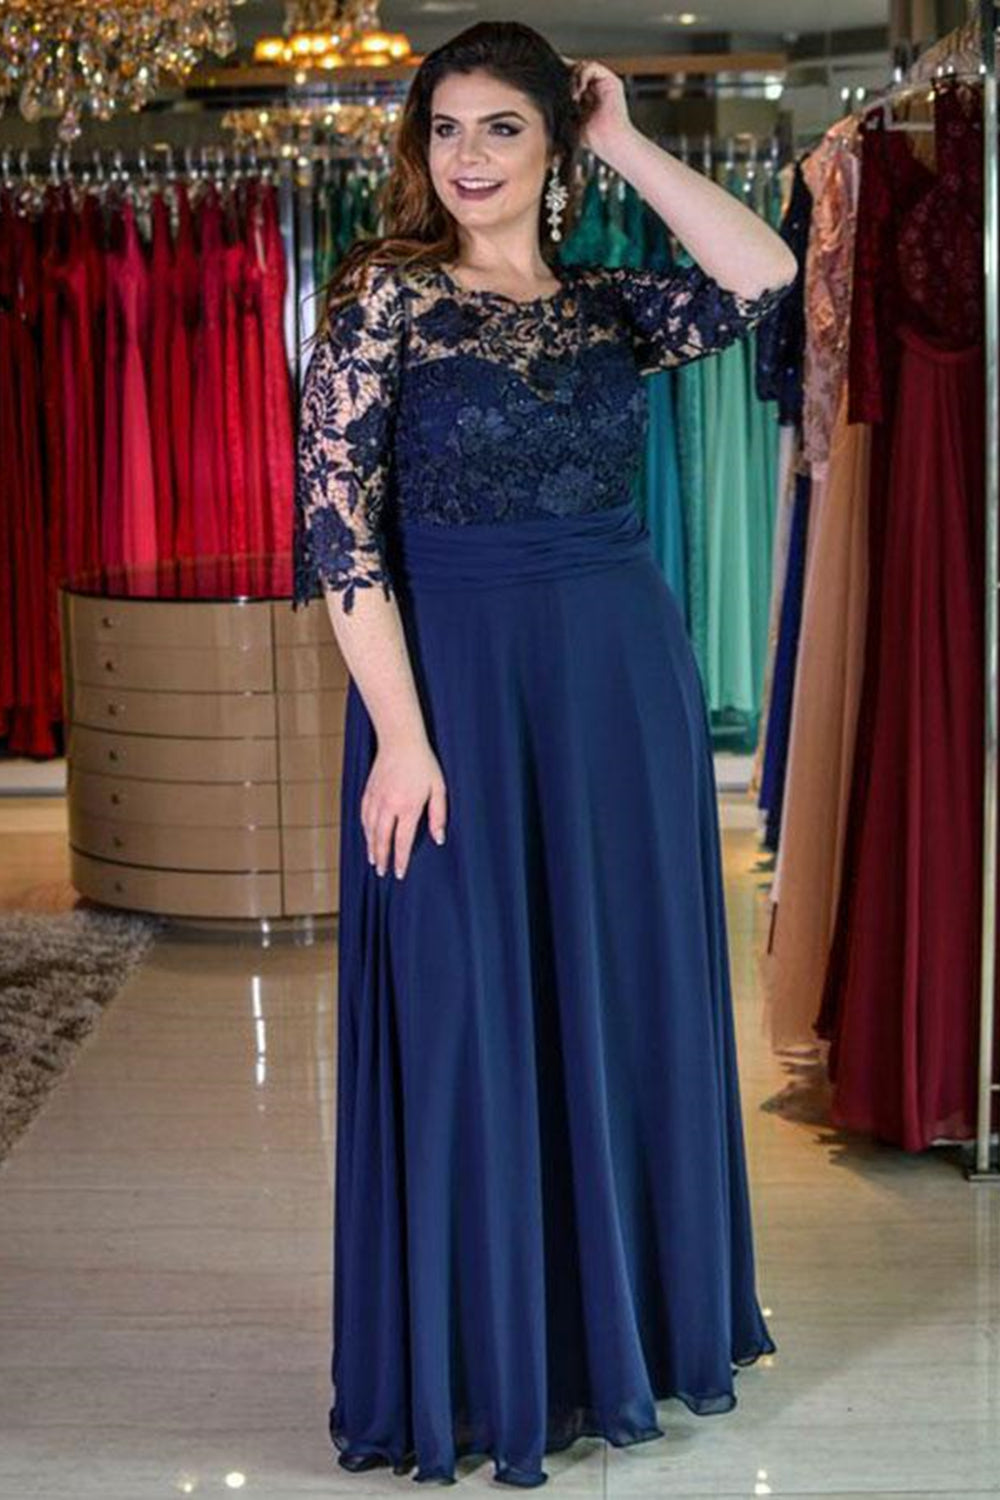 Round Neck Half Sleeves Navy Blue Lace Long Prom Dresses, Half Sleeves Navy Blue Formal Graduation Evening Dresses